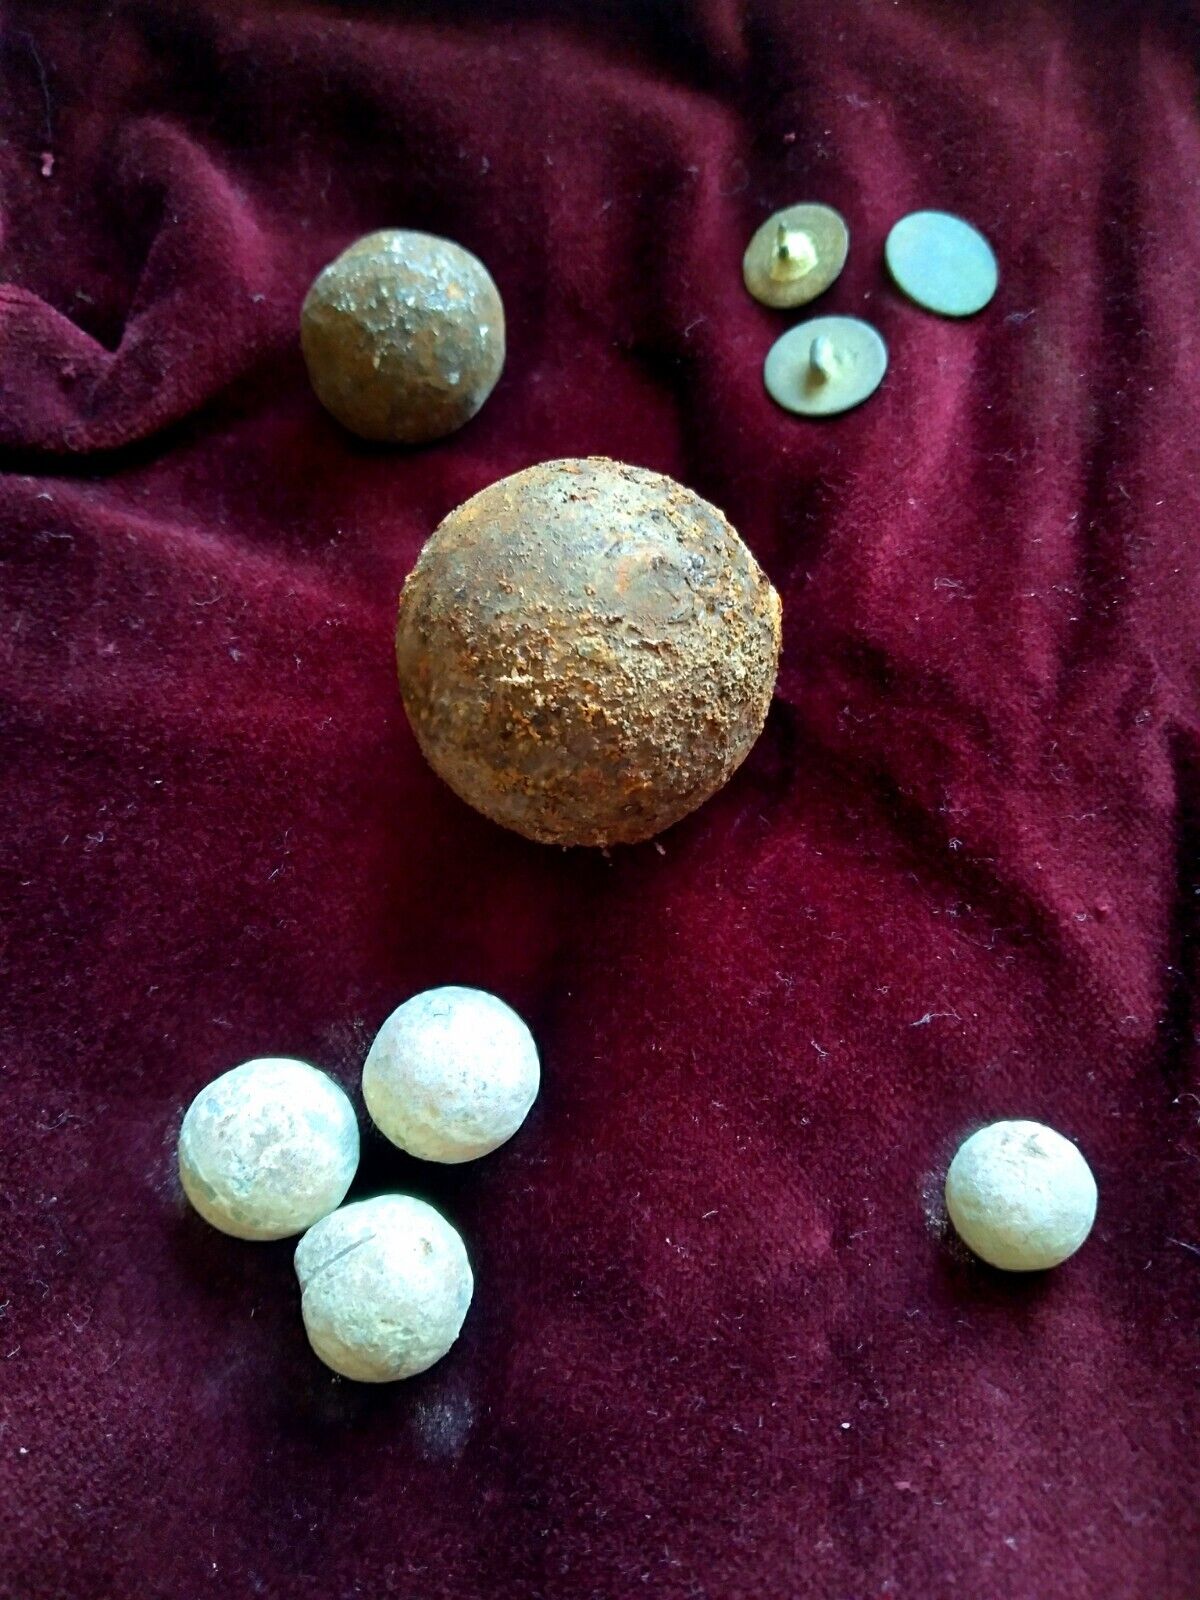 Authentic Alamo Relics, San Antonio, TX 1836. From a Private Excavation In 2008.